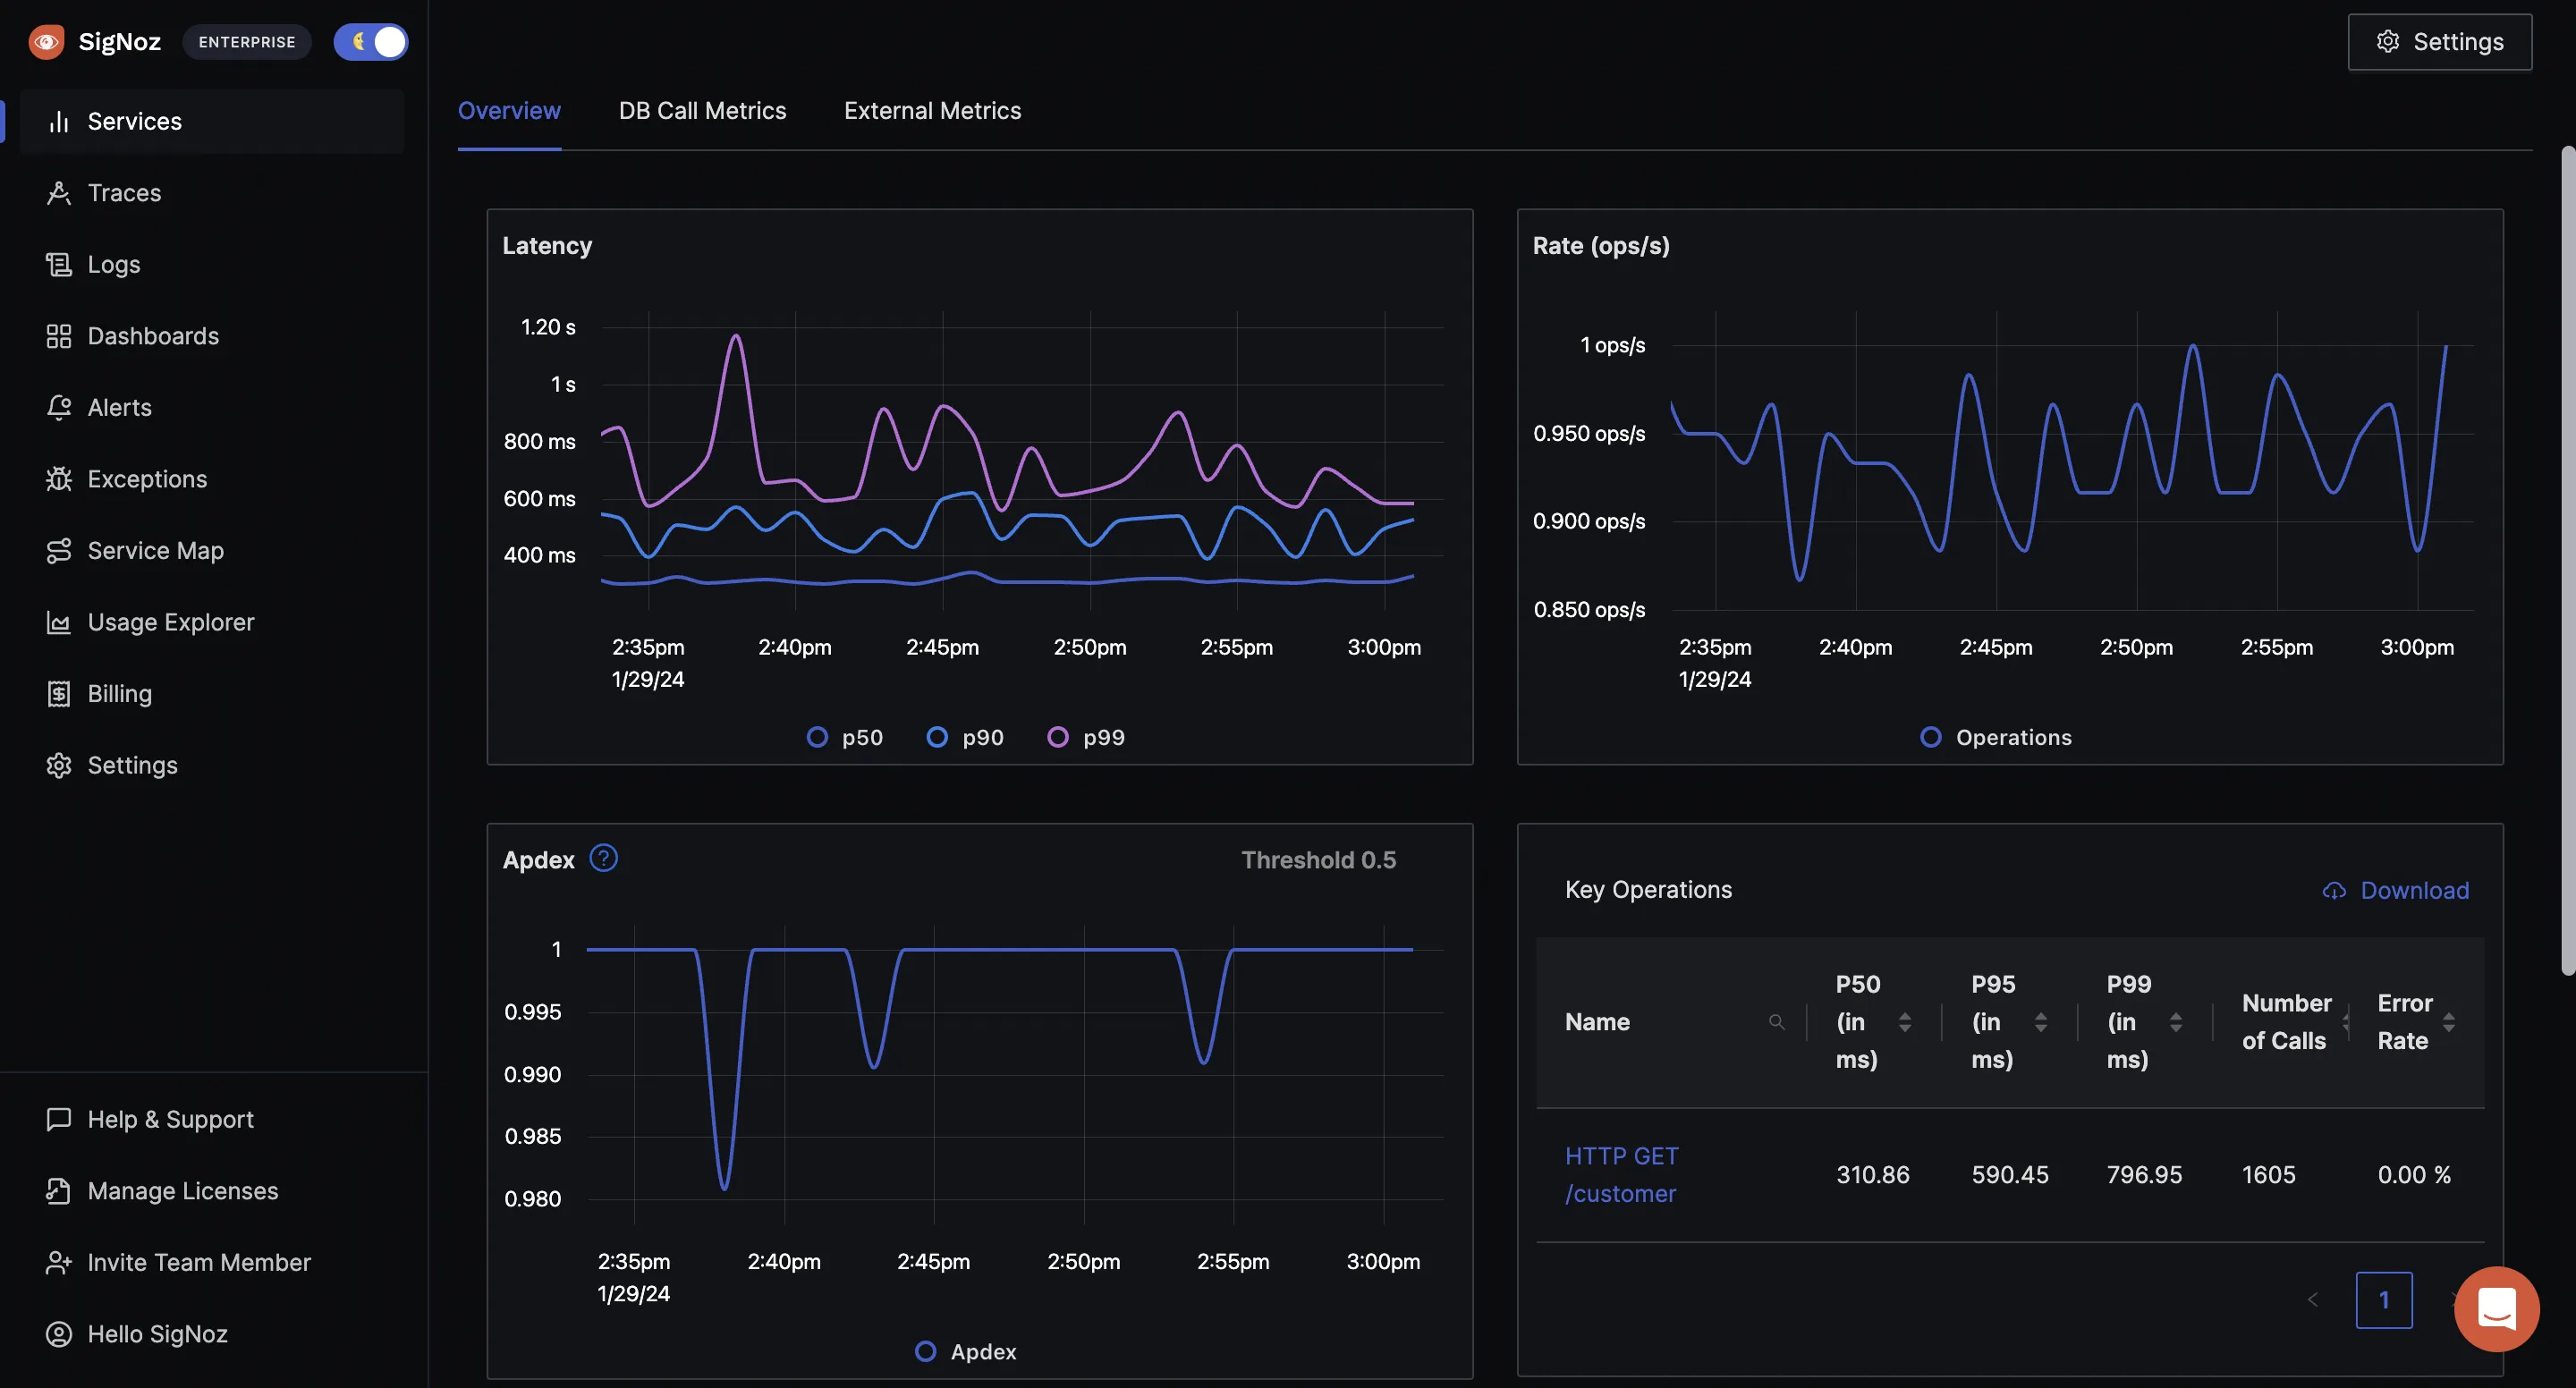 SigNoz UI showing application overview metrics like RPS, 50th/90th/99th Percentile latencies, and Error Rate